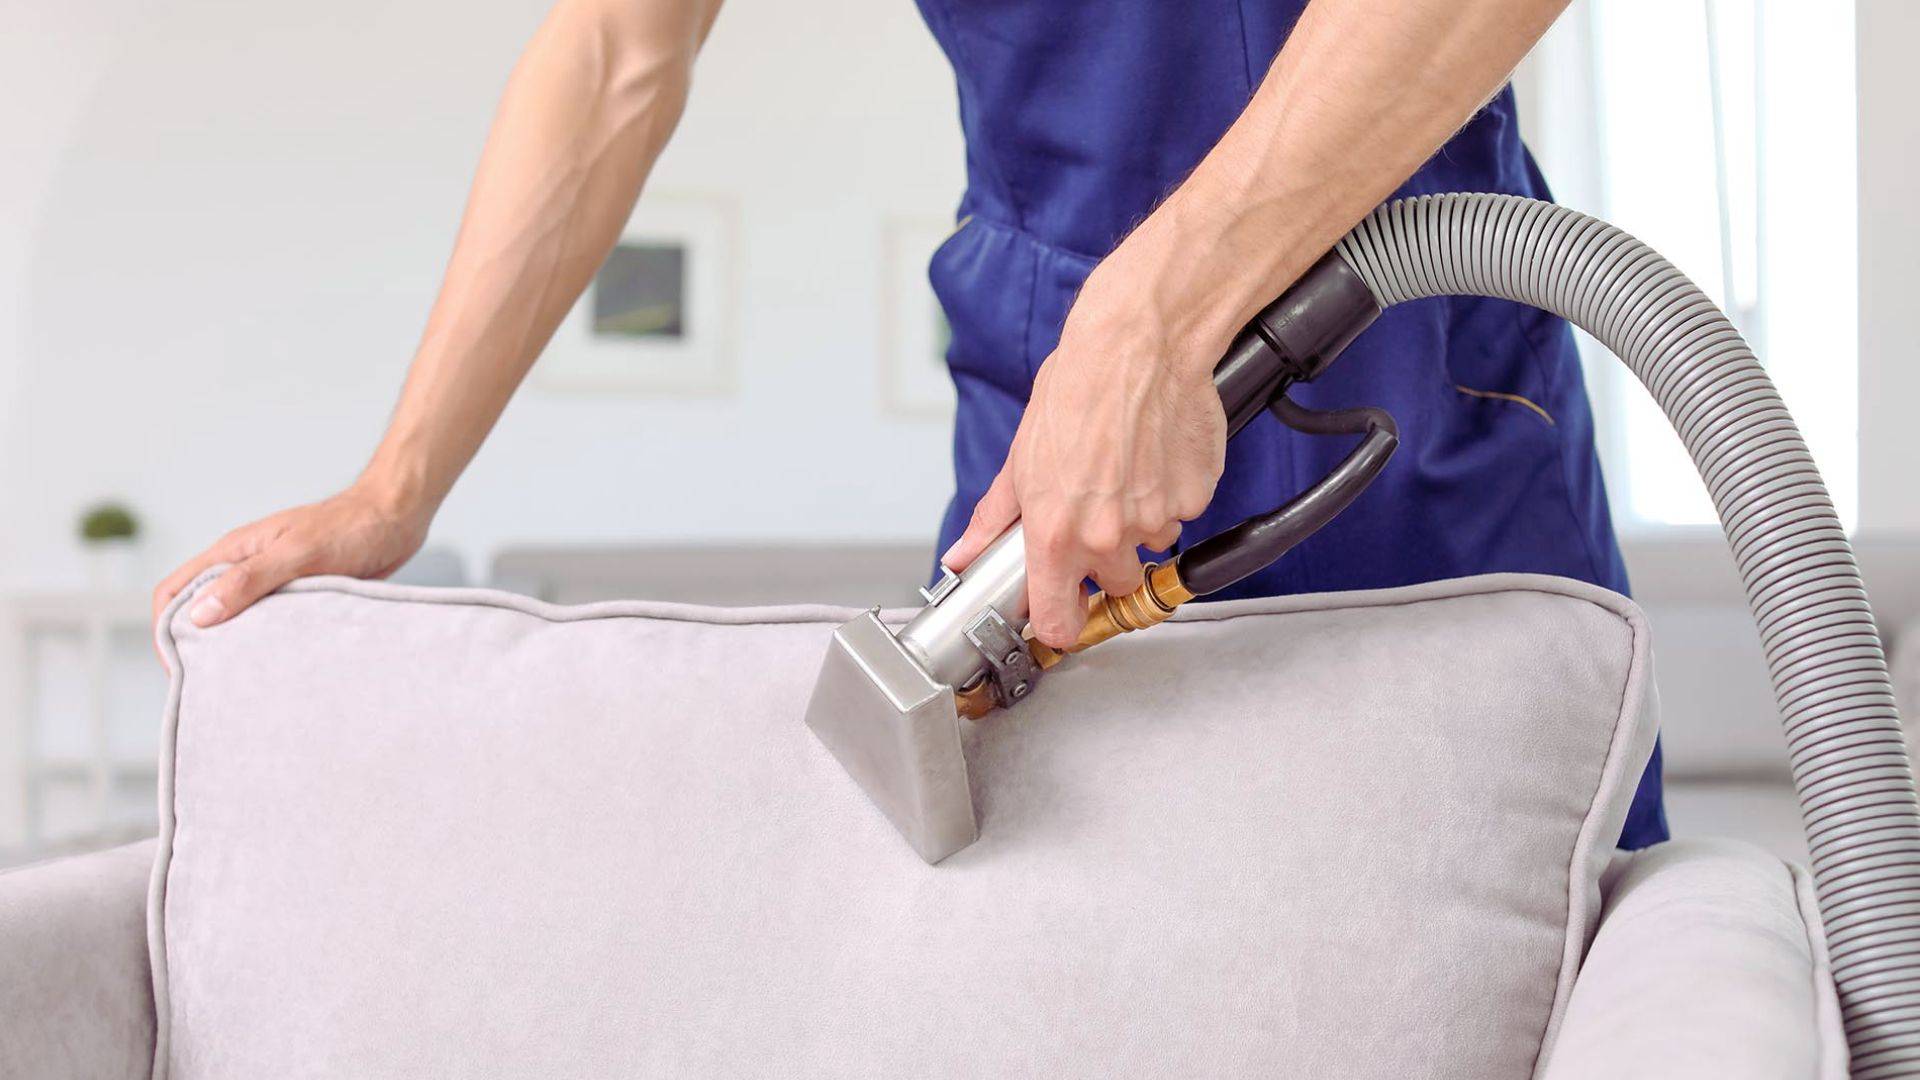 Professional carpet cleaning gold coast and licensed pest control services by the carpet surgeon showing professional cleaning sofa